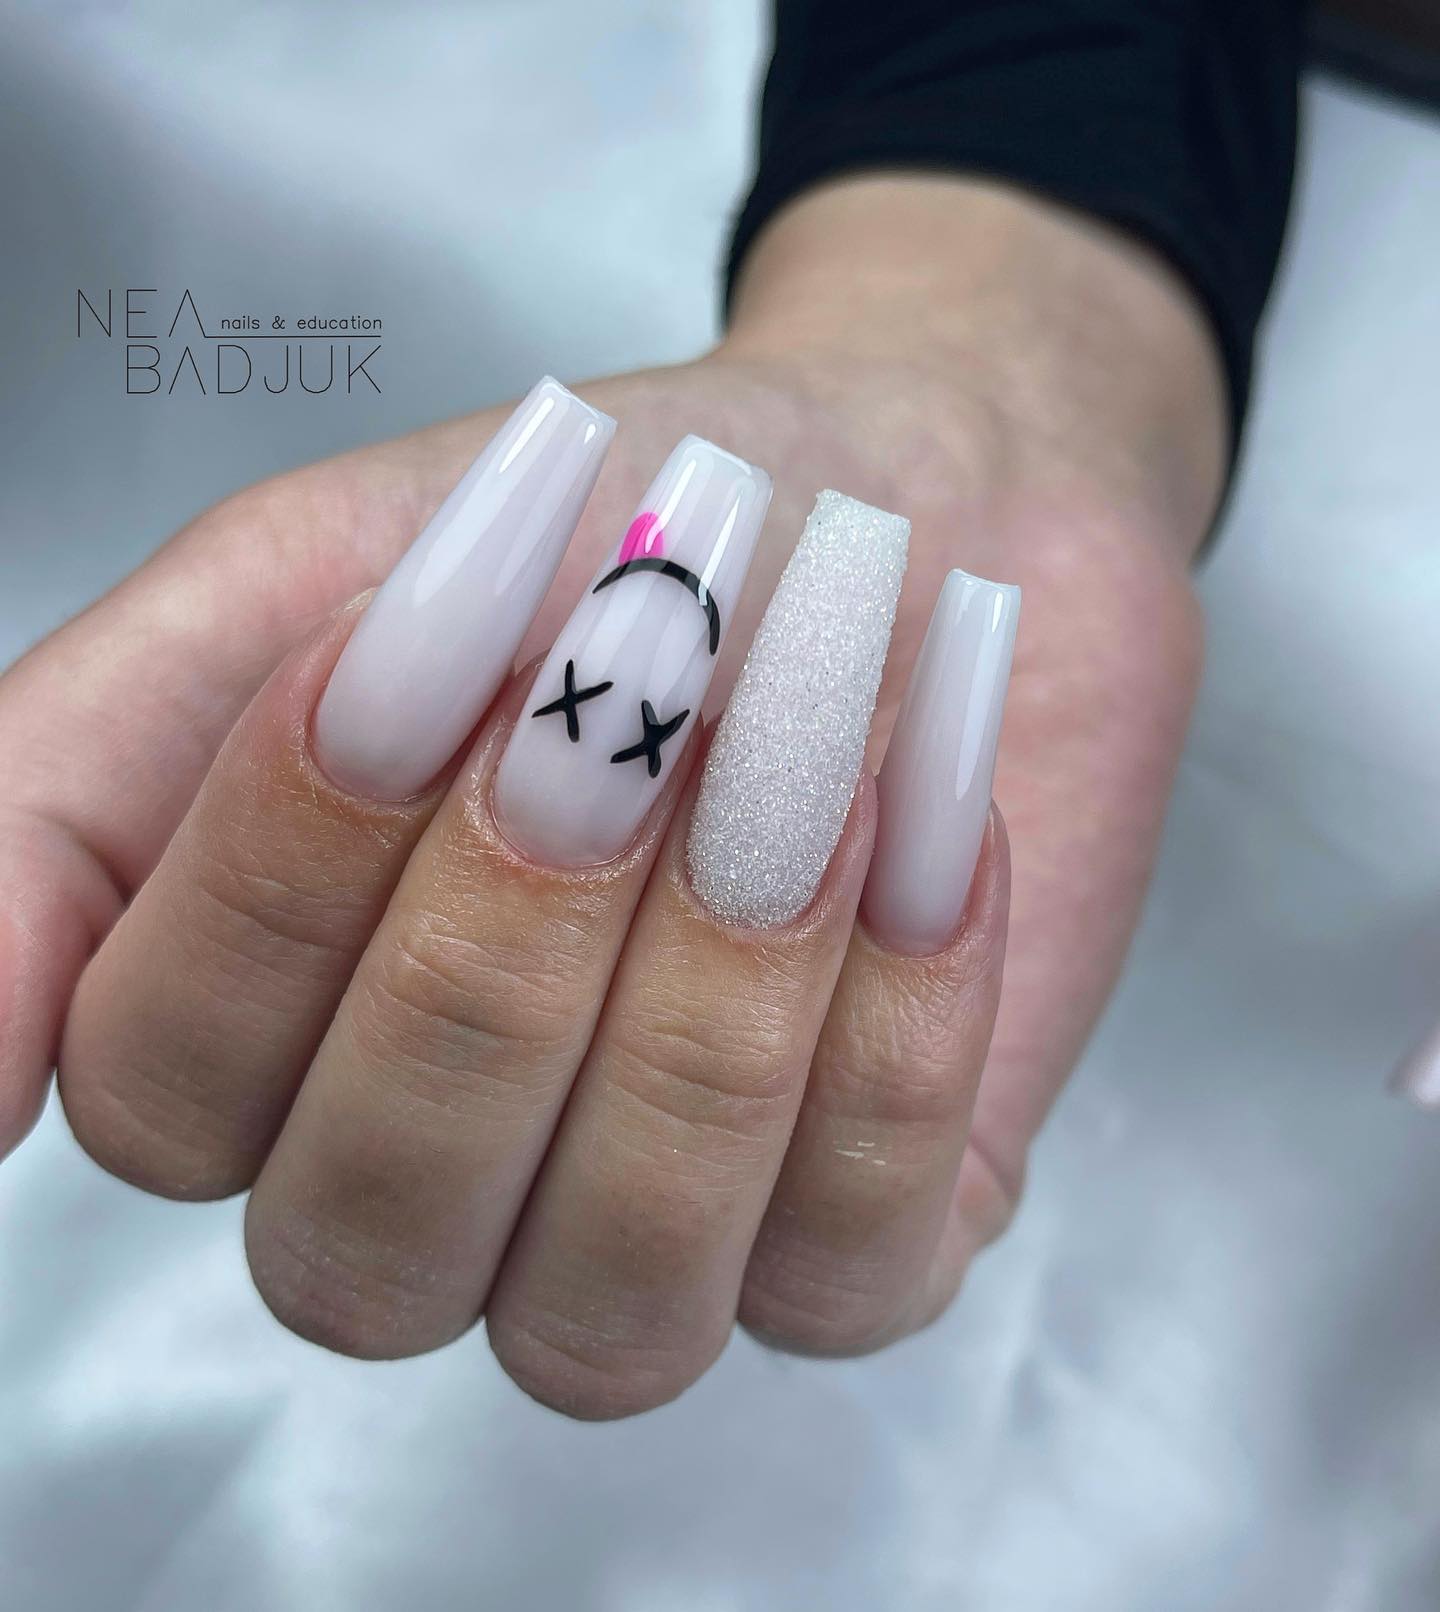 White is such a pure color that it turns every nail into an art piece. To show your personality and change its energy, you can have a glittered white accent nail with a smiley face. It will look fun and creative at the same time!